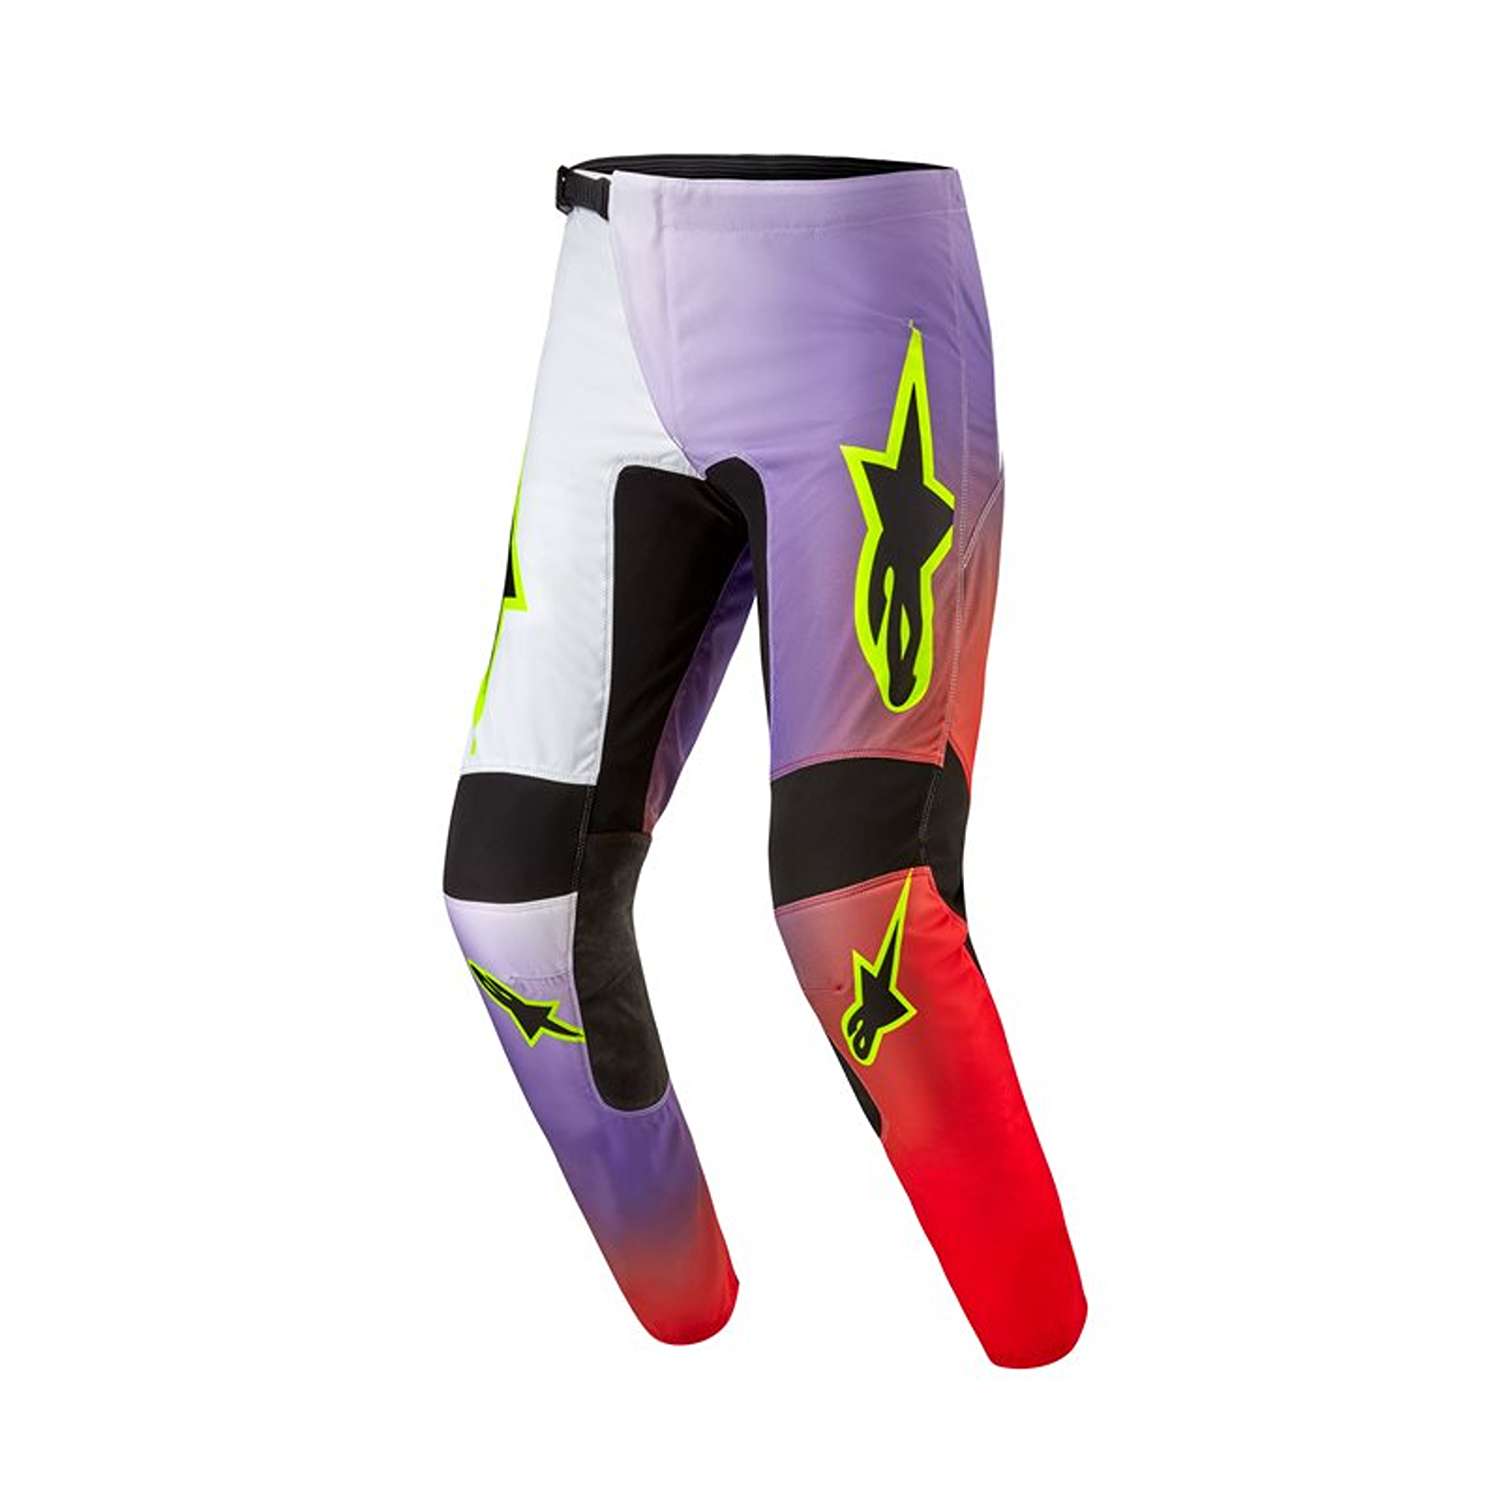 Image of Alpinestars Fluid Lucent Pants White Neon Red Yellow Fluo Size 40 EN